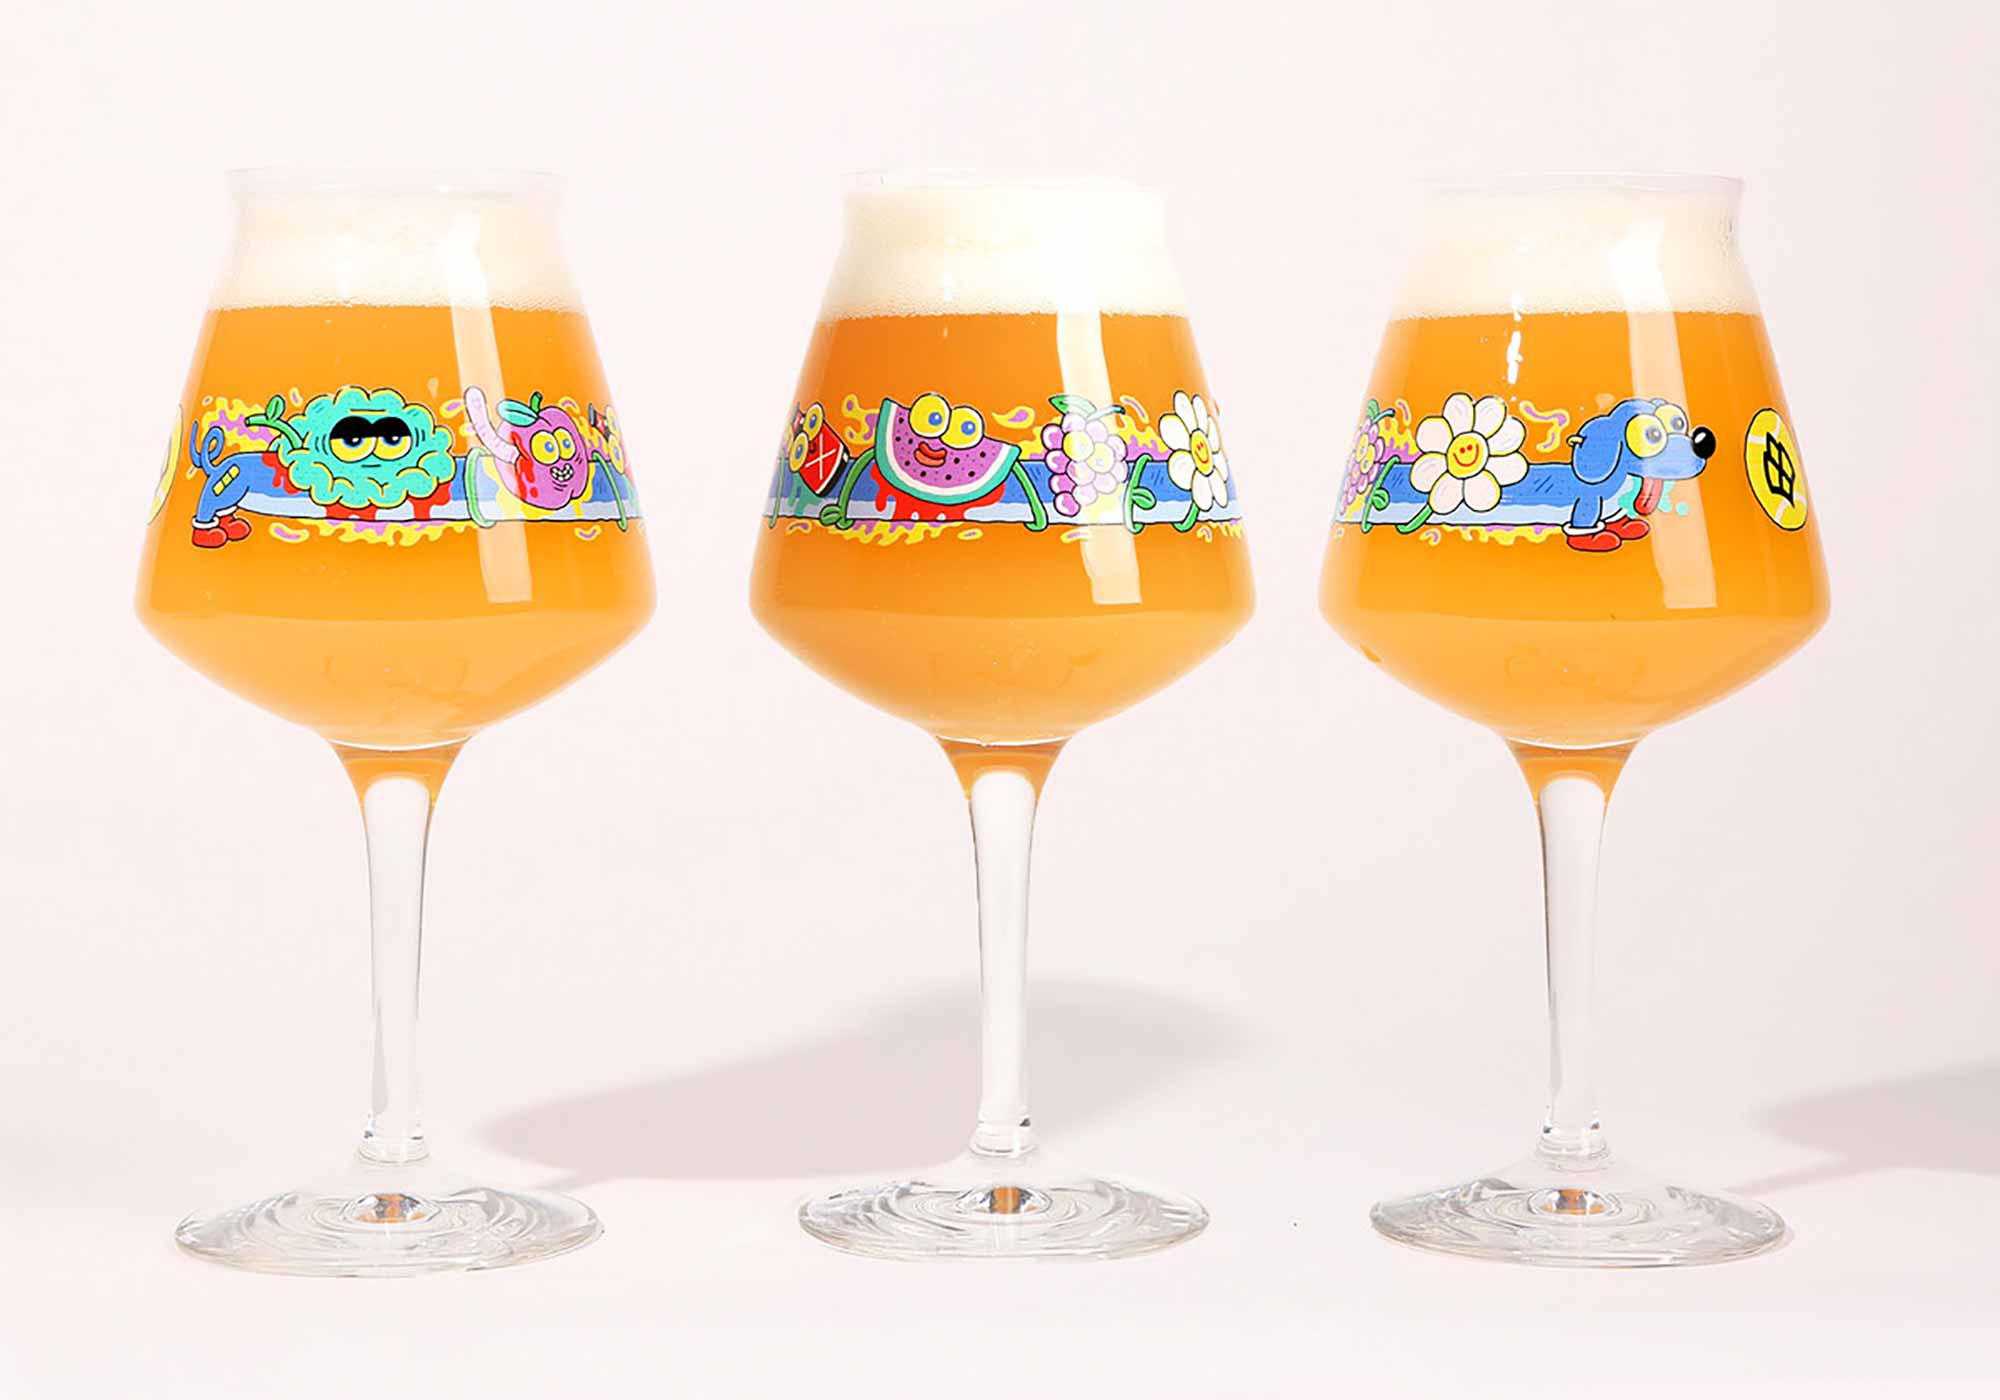 Why We Love the Teku Beer Glass